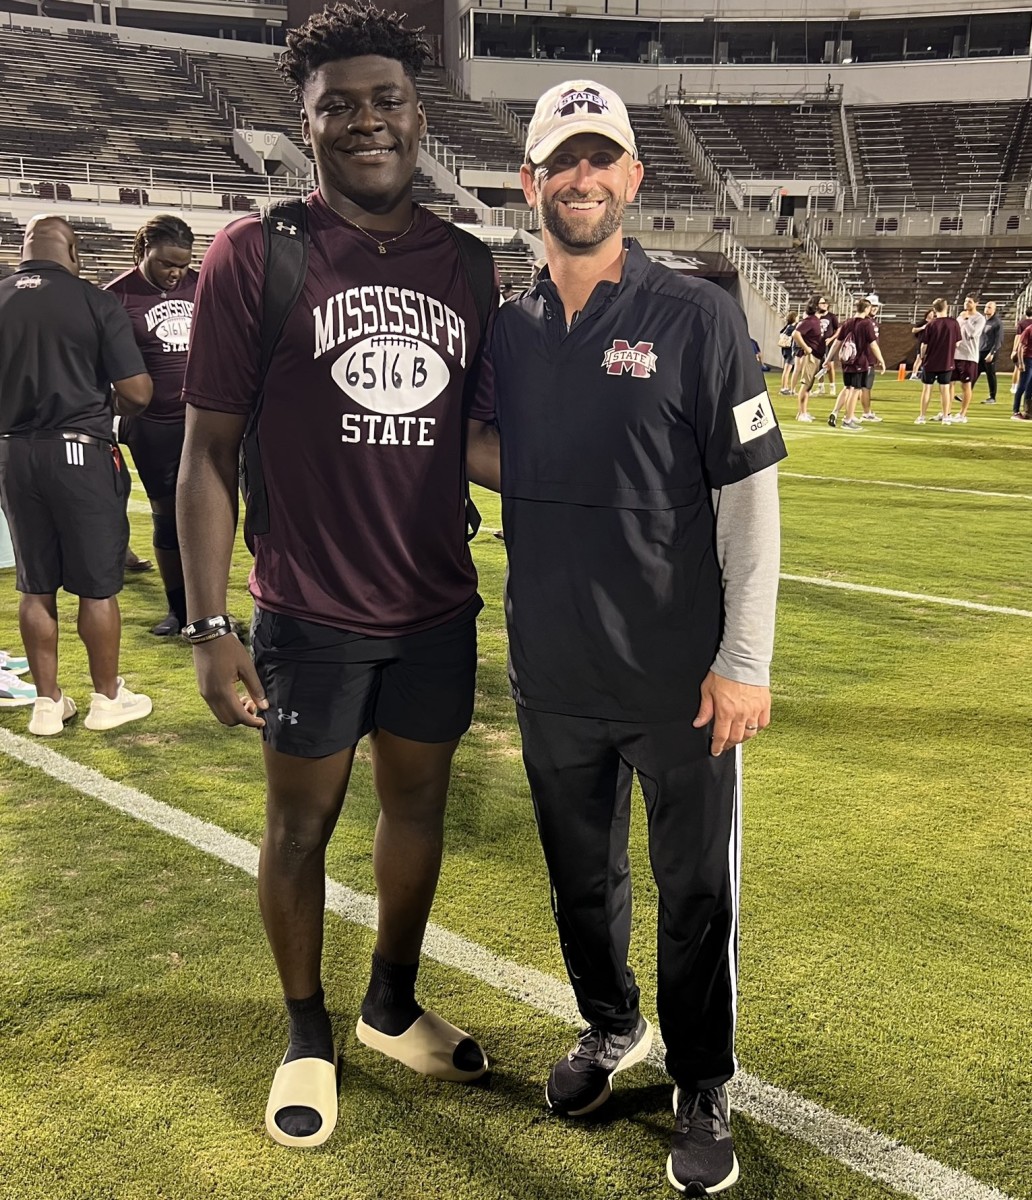 Bradley Shaw, who has a UW offer, tours Mississippi State.